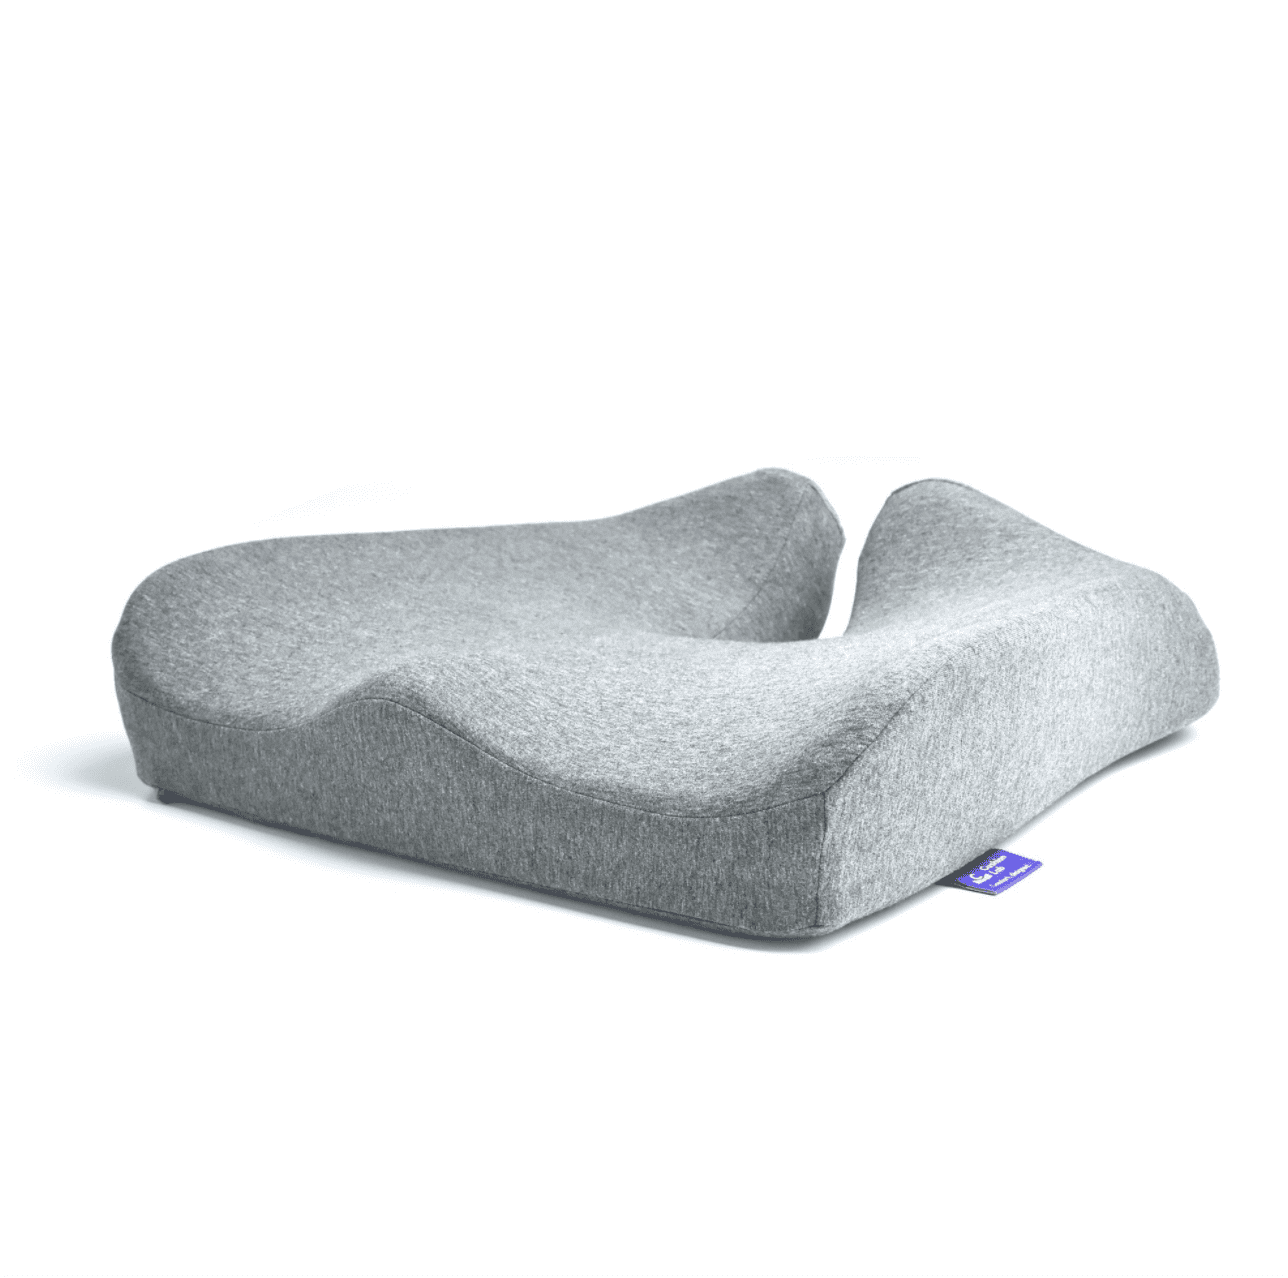 Experience Relief and Seek Comfort With Cushion Lab #REVIEW